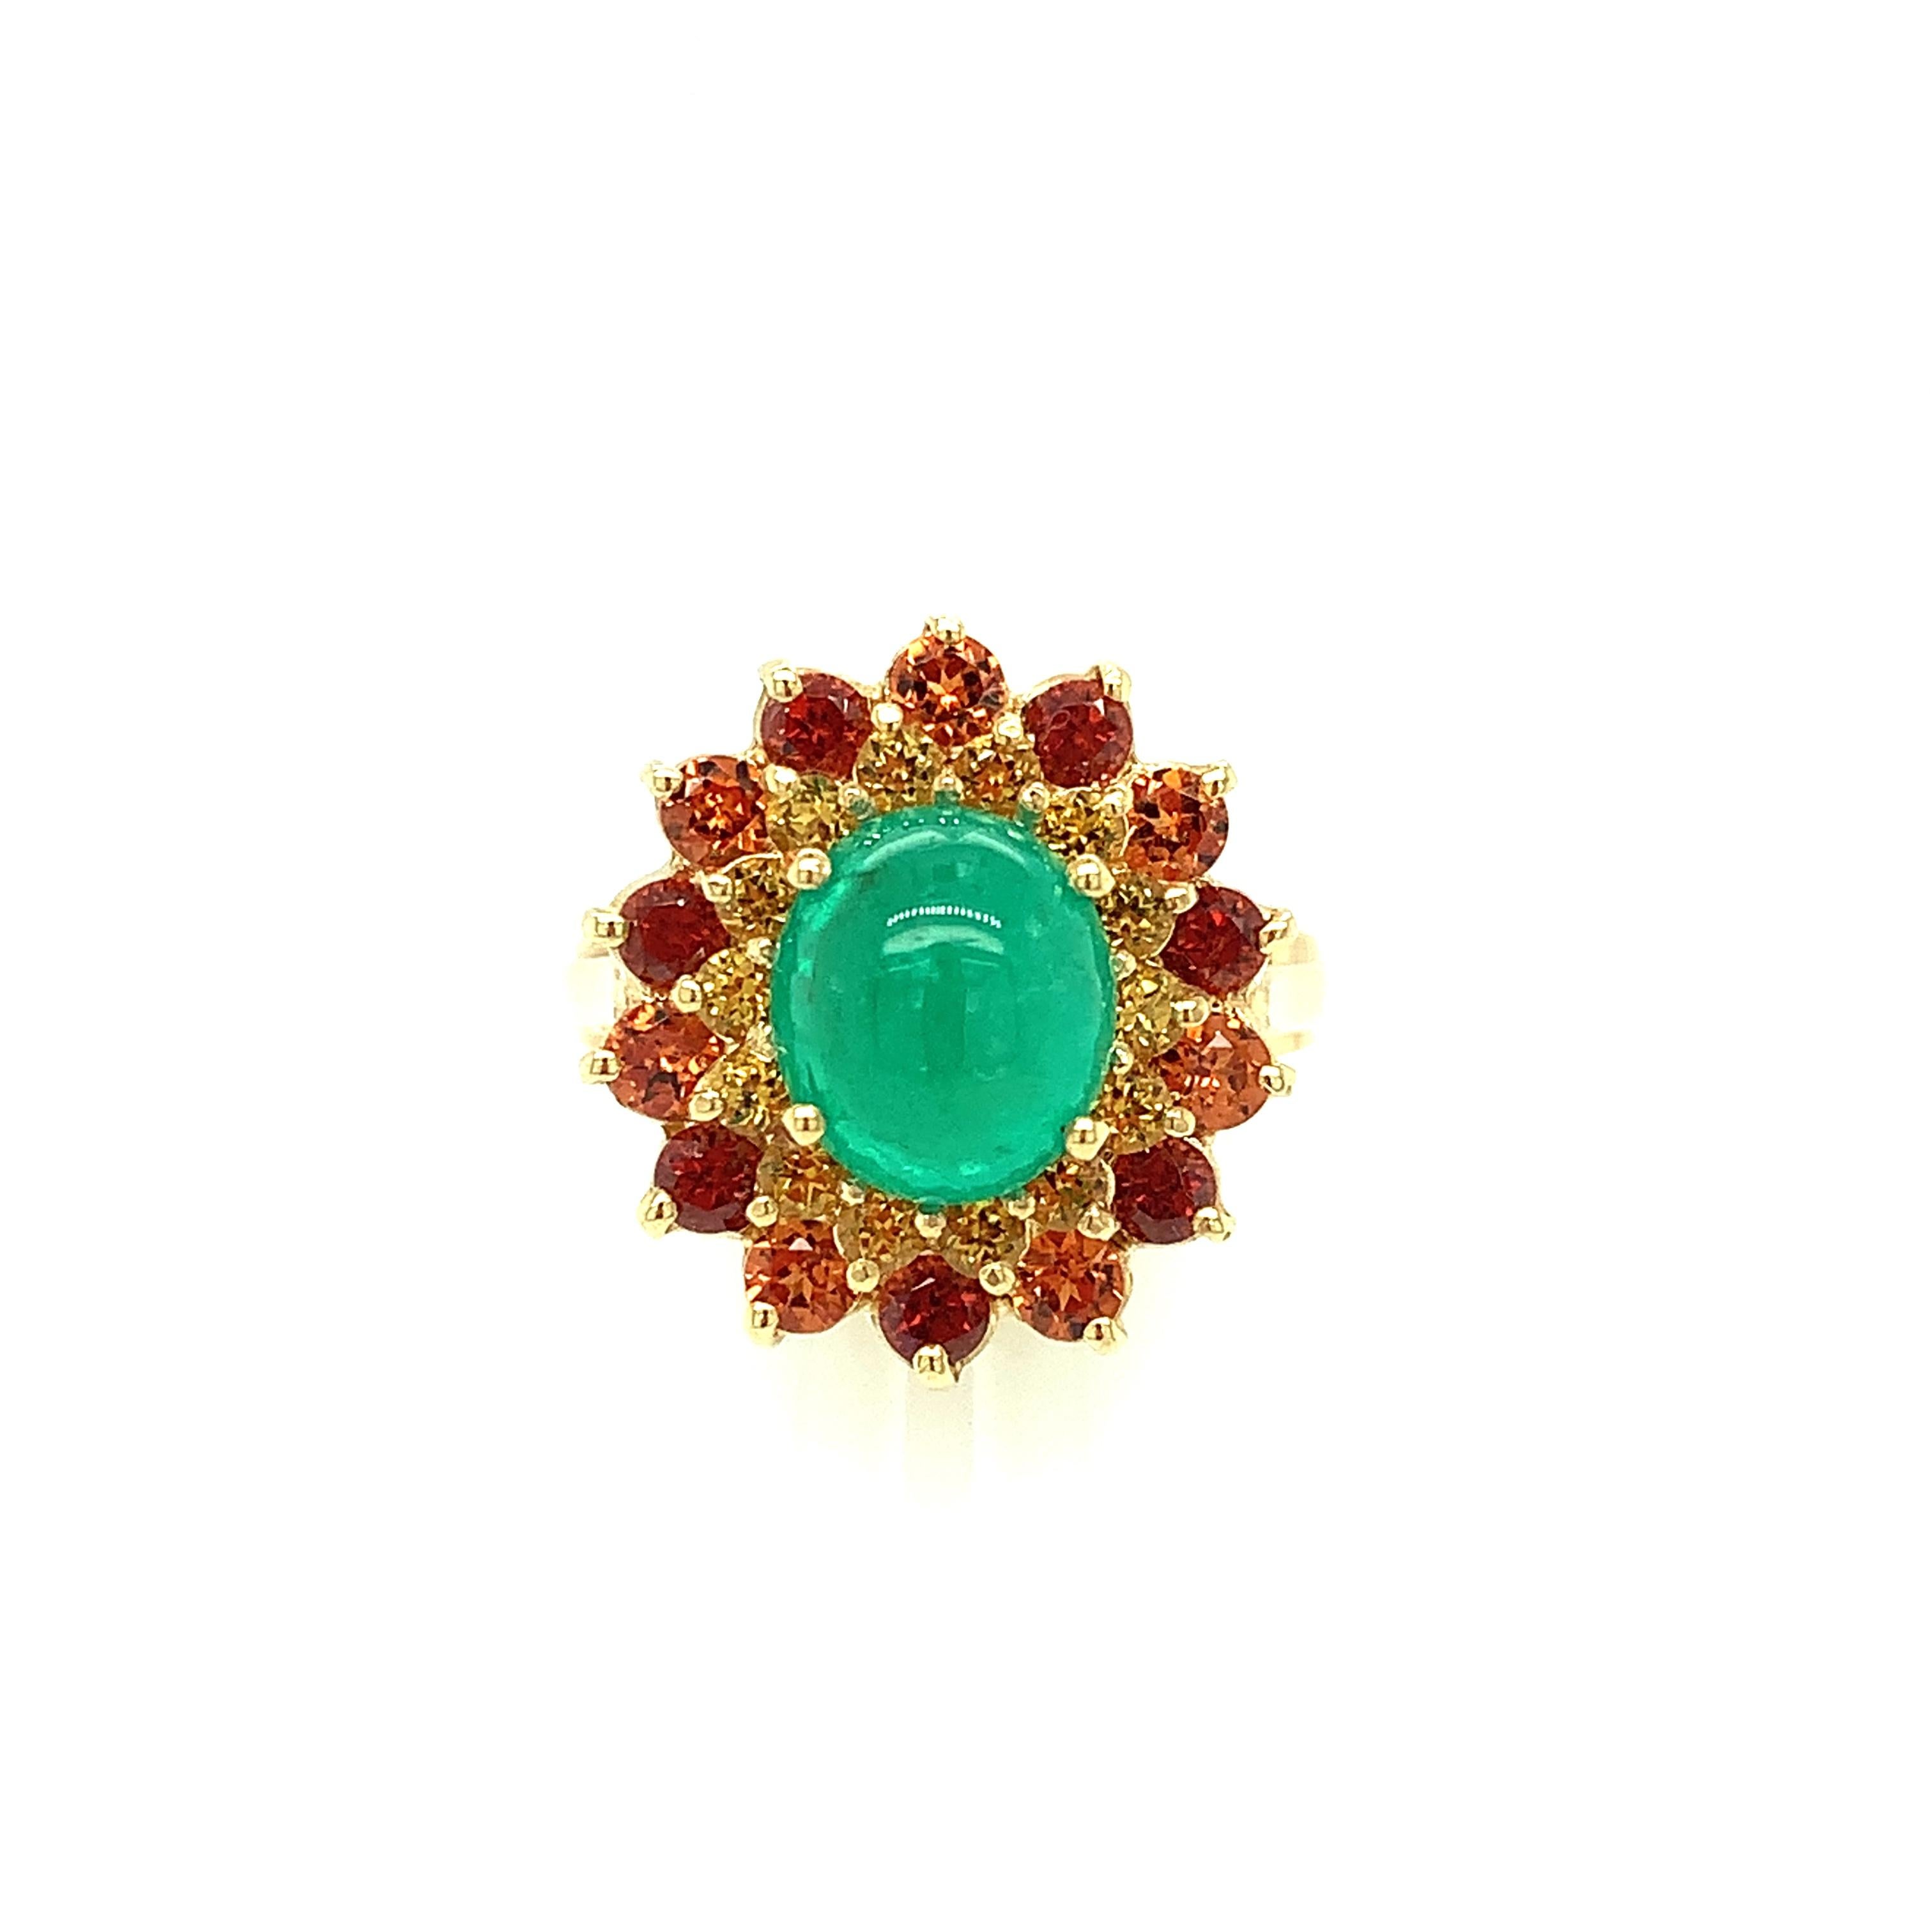 A richly colored emerald cabochon is the highlight of this pretty 14k yellow gold cocktail ring. The emerald is highly translucent and a lovely, vibrant color. An inner halo of bright golden yellow tourmalines surround the center gem, with an outer